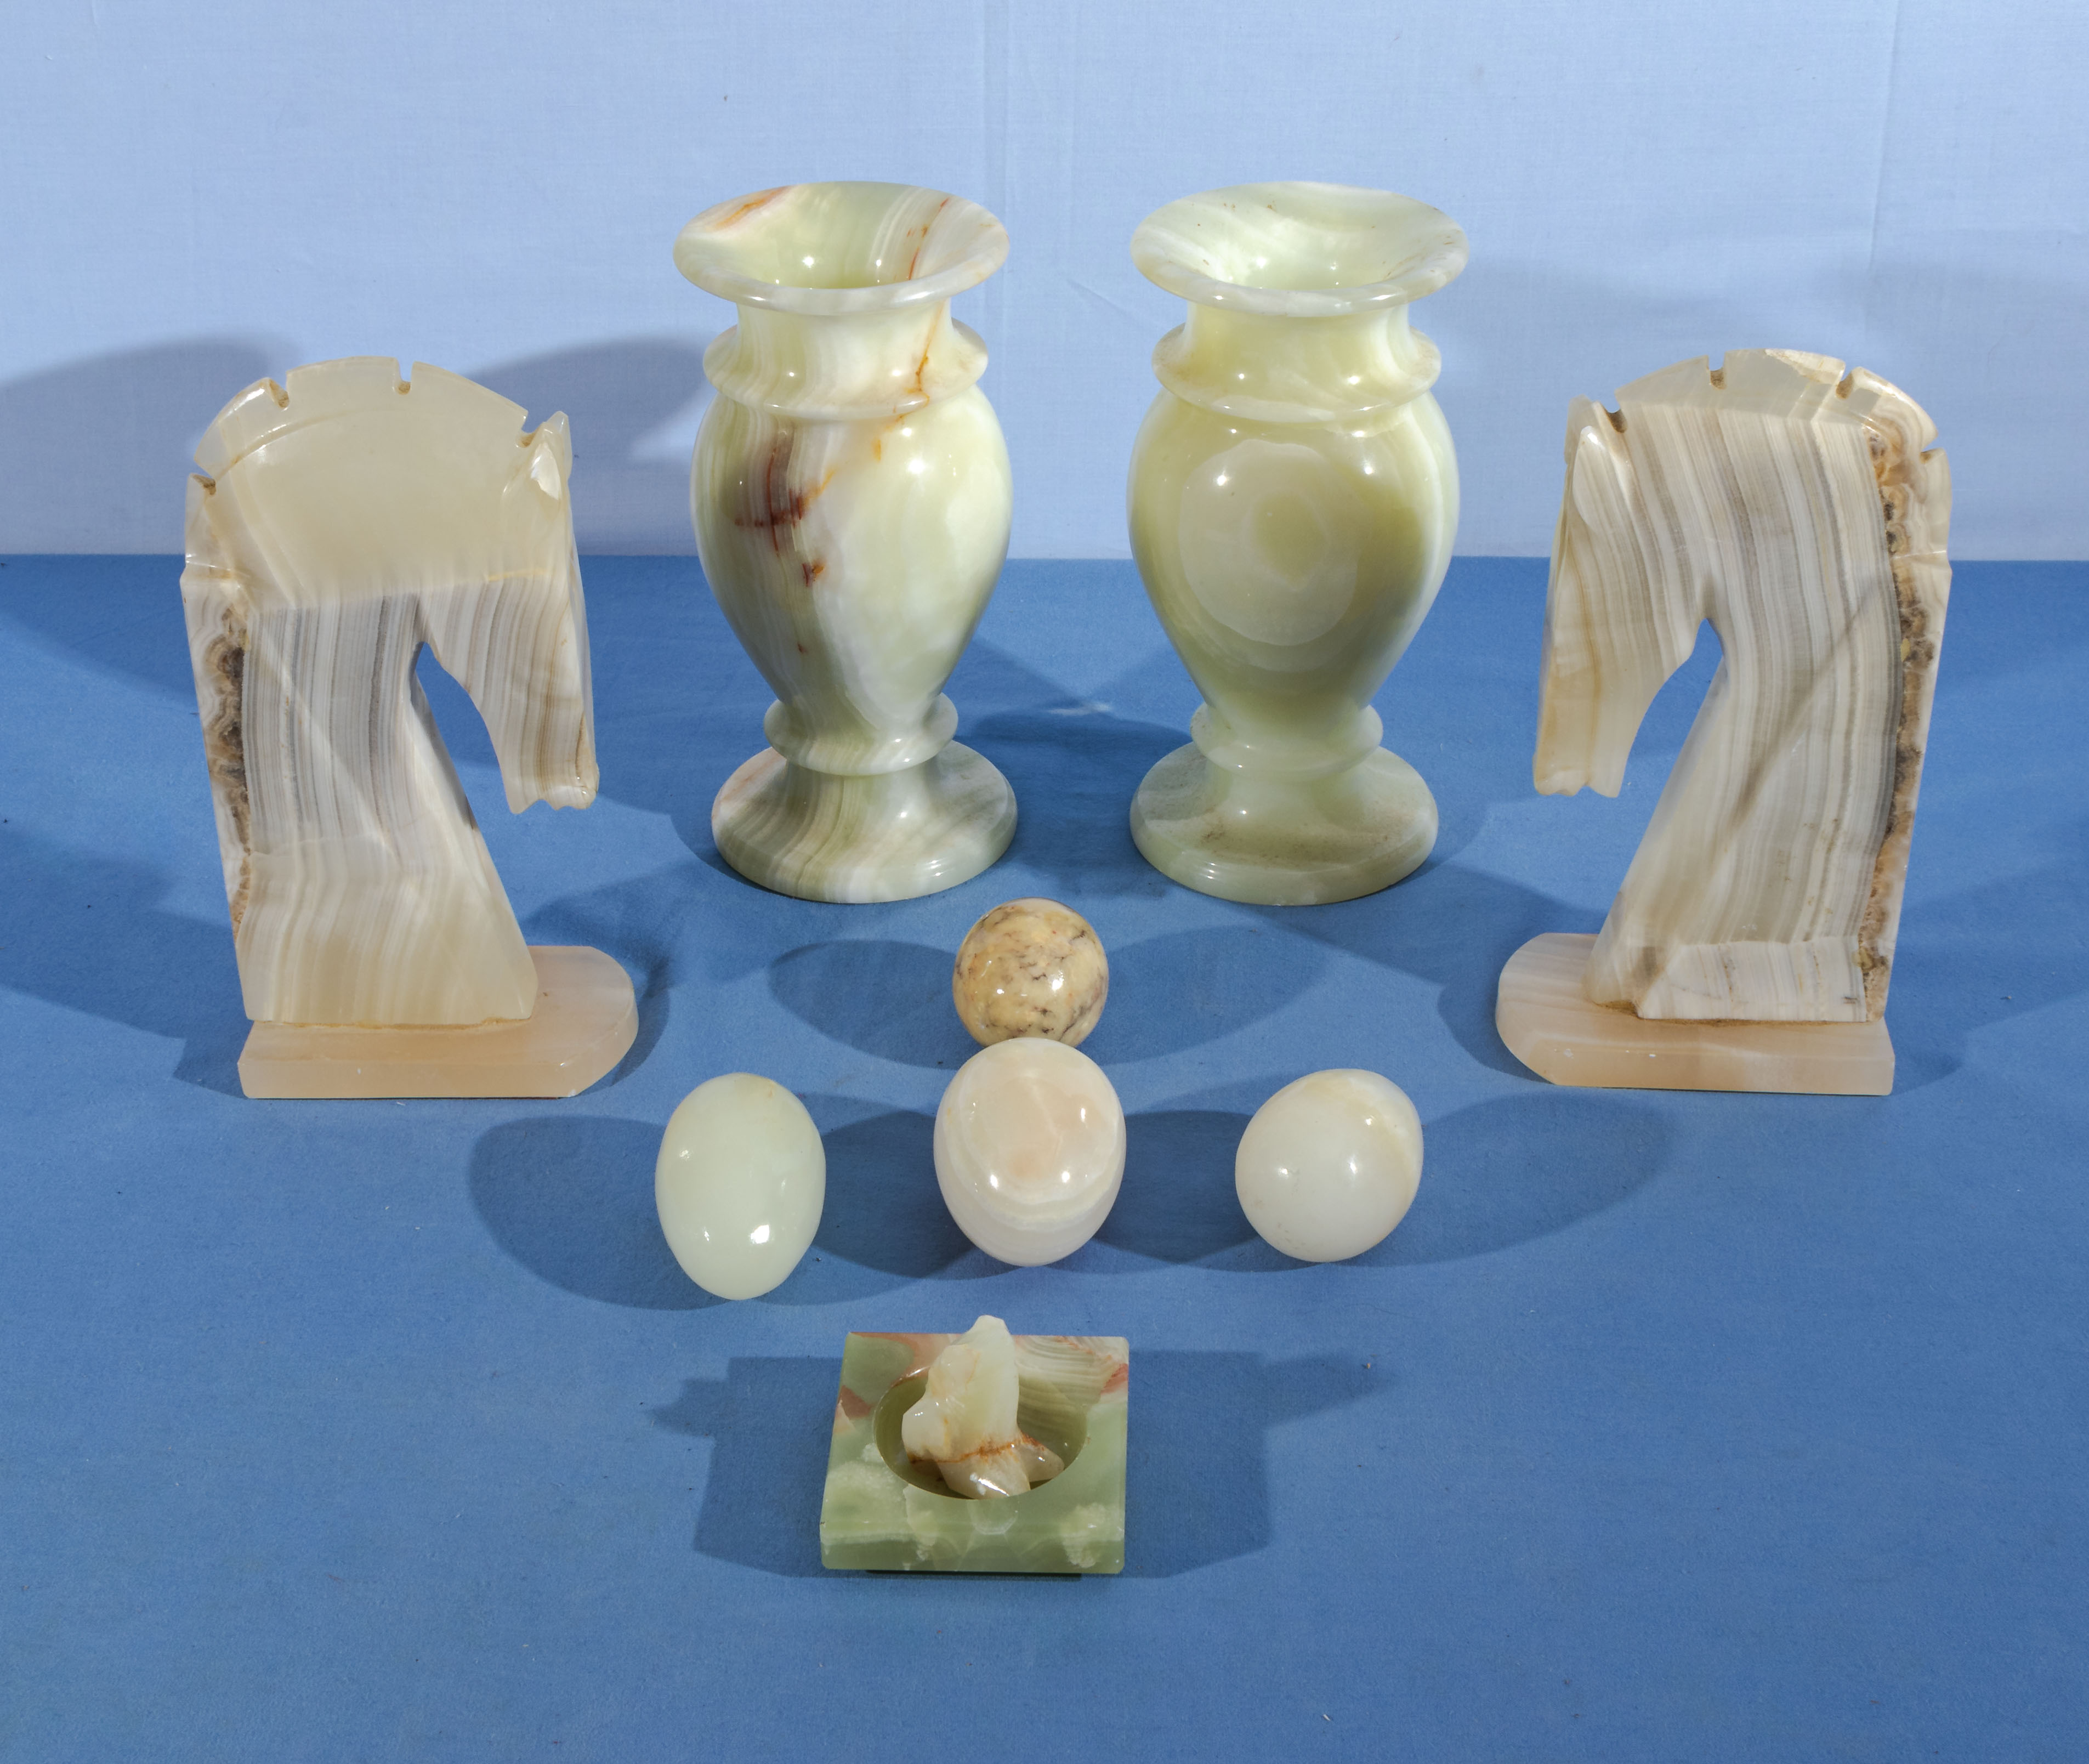 Pair of onyx vases, pair of bookends and eggs